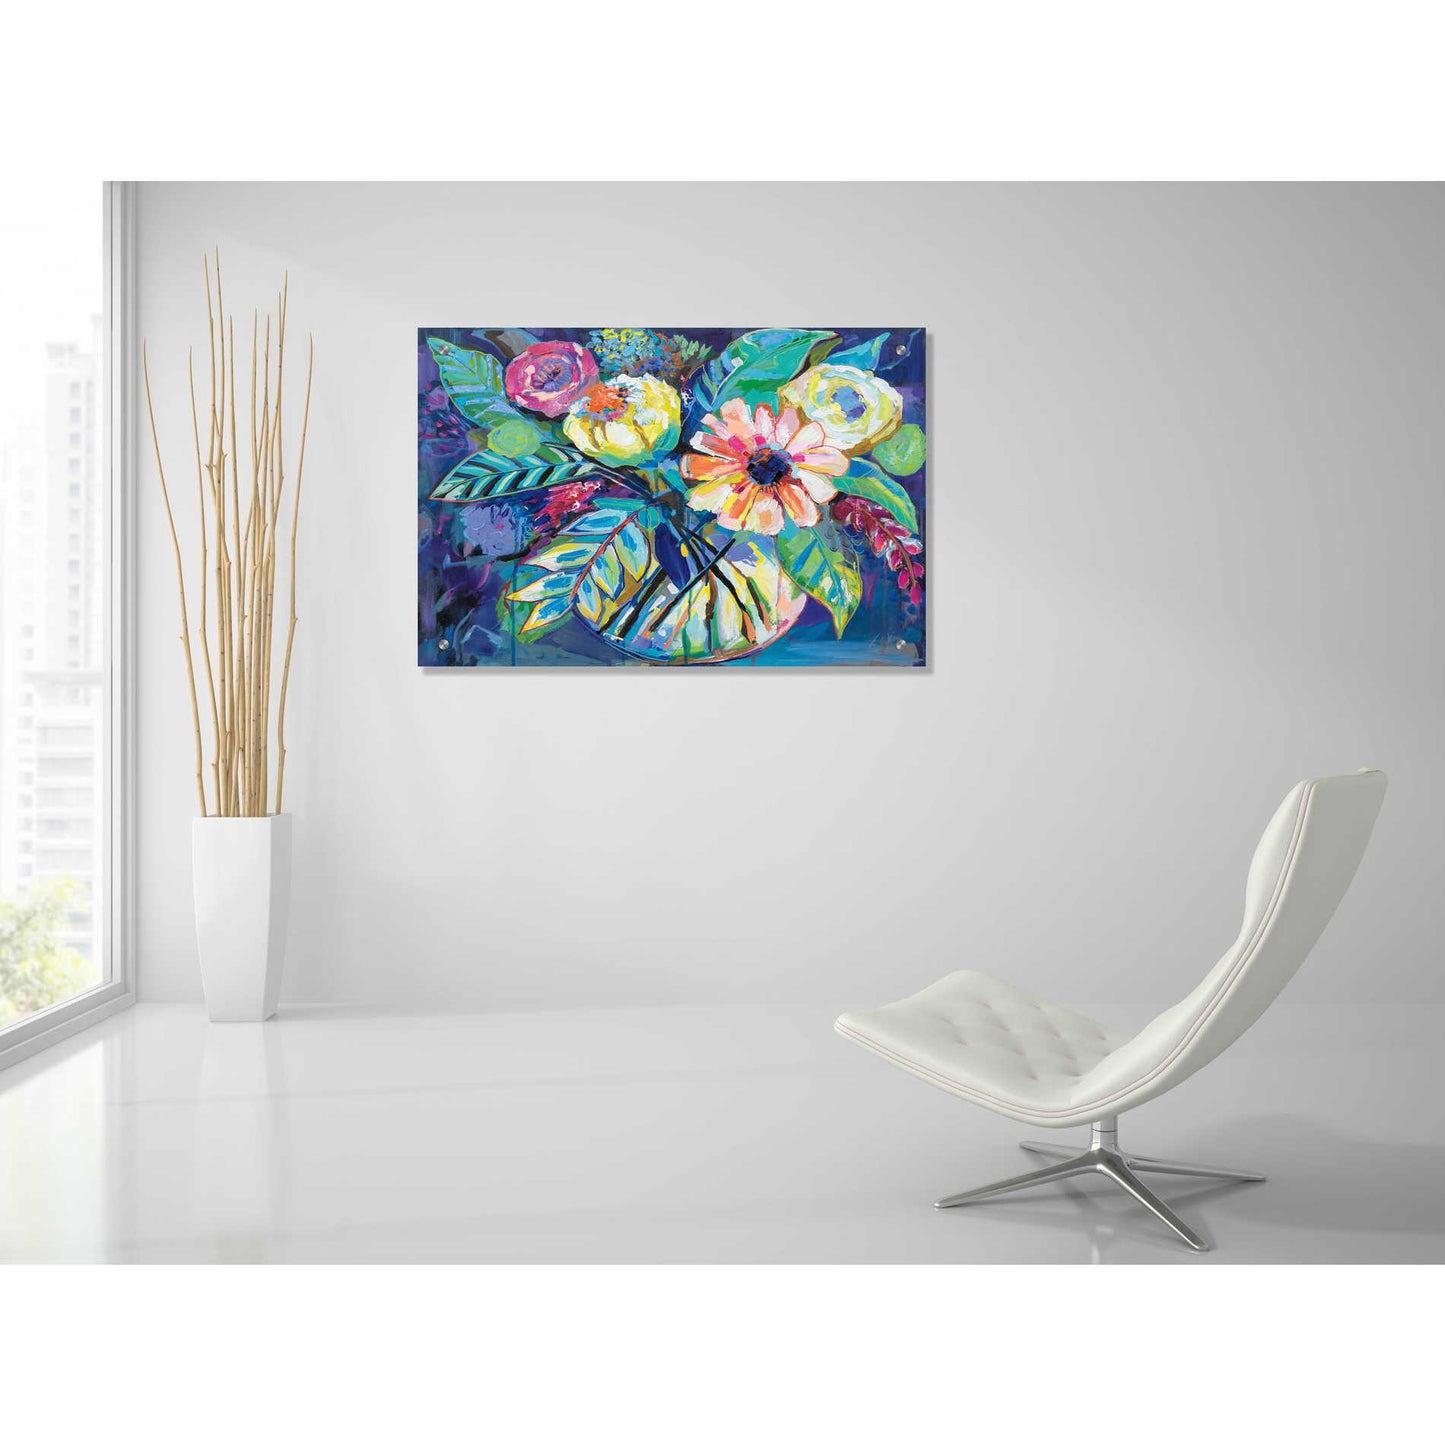 Epic Art 'Happiness' by Jeanette Vertentes, Acrylic Glass Wall Art,36x24